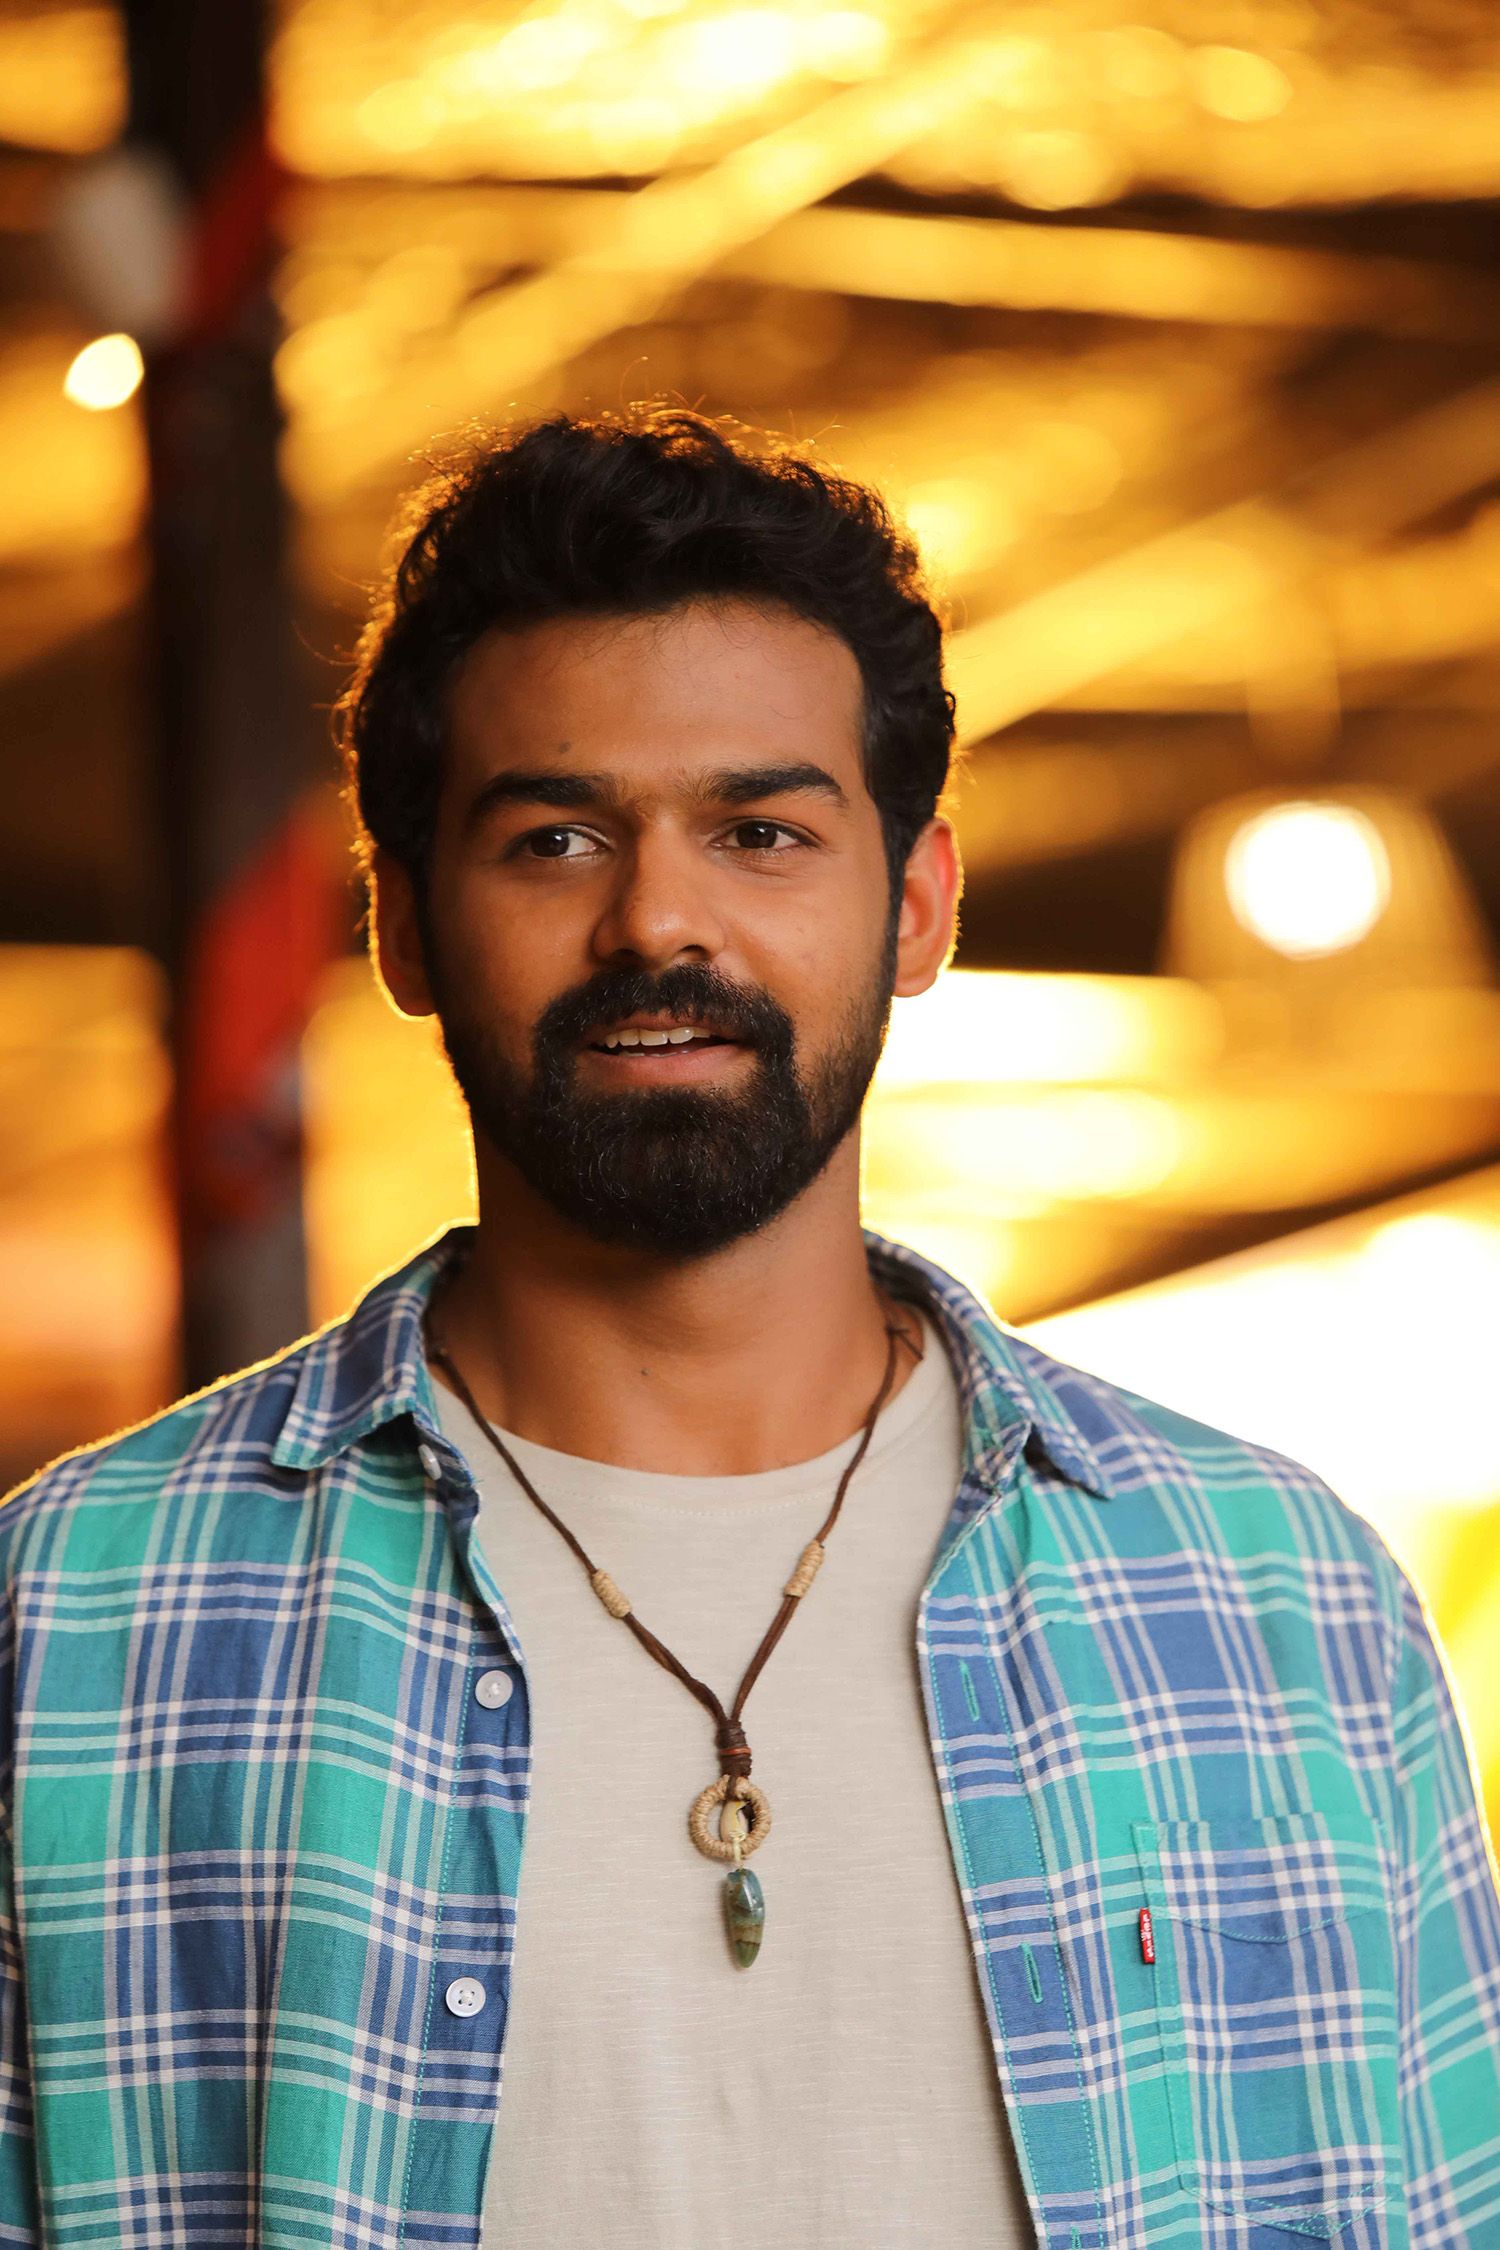 Check out these new stills of Pranav Mohanlal from Irupathiyonnam Noottandu